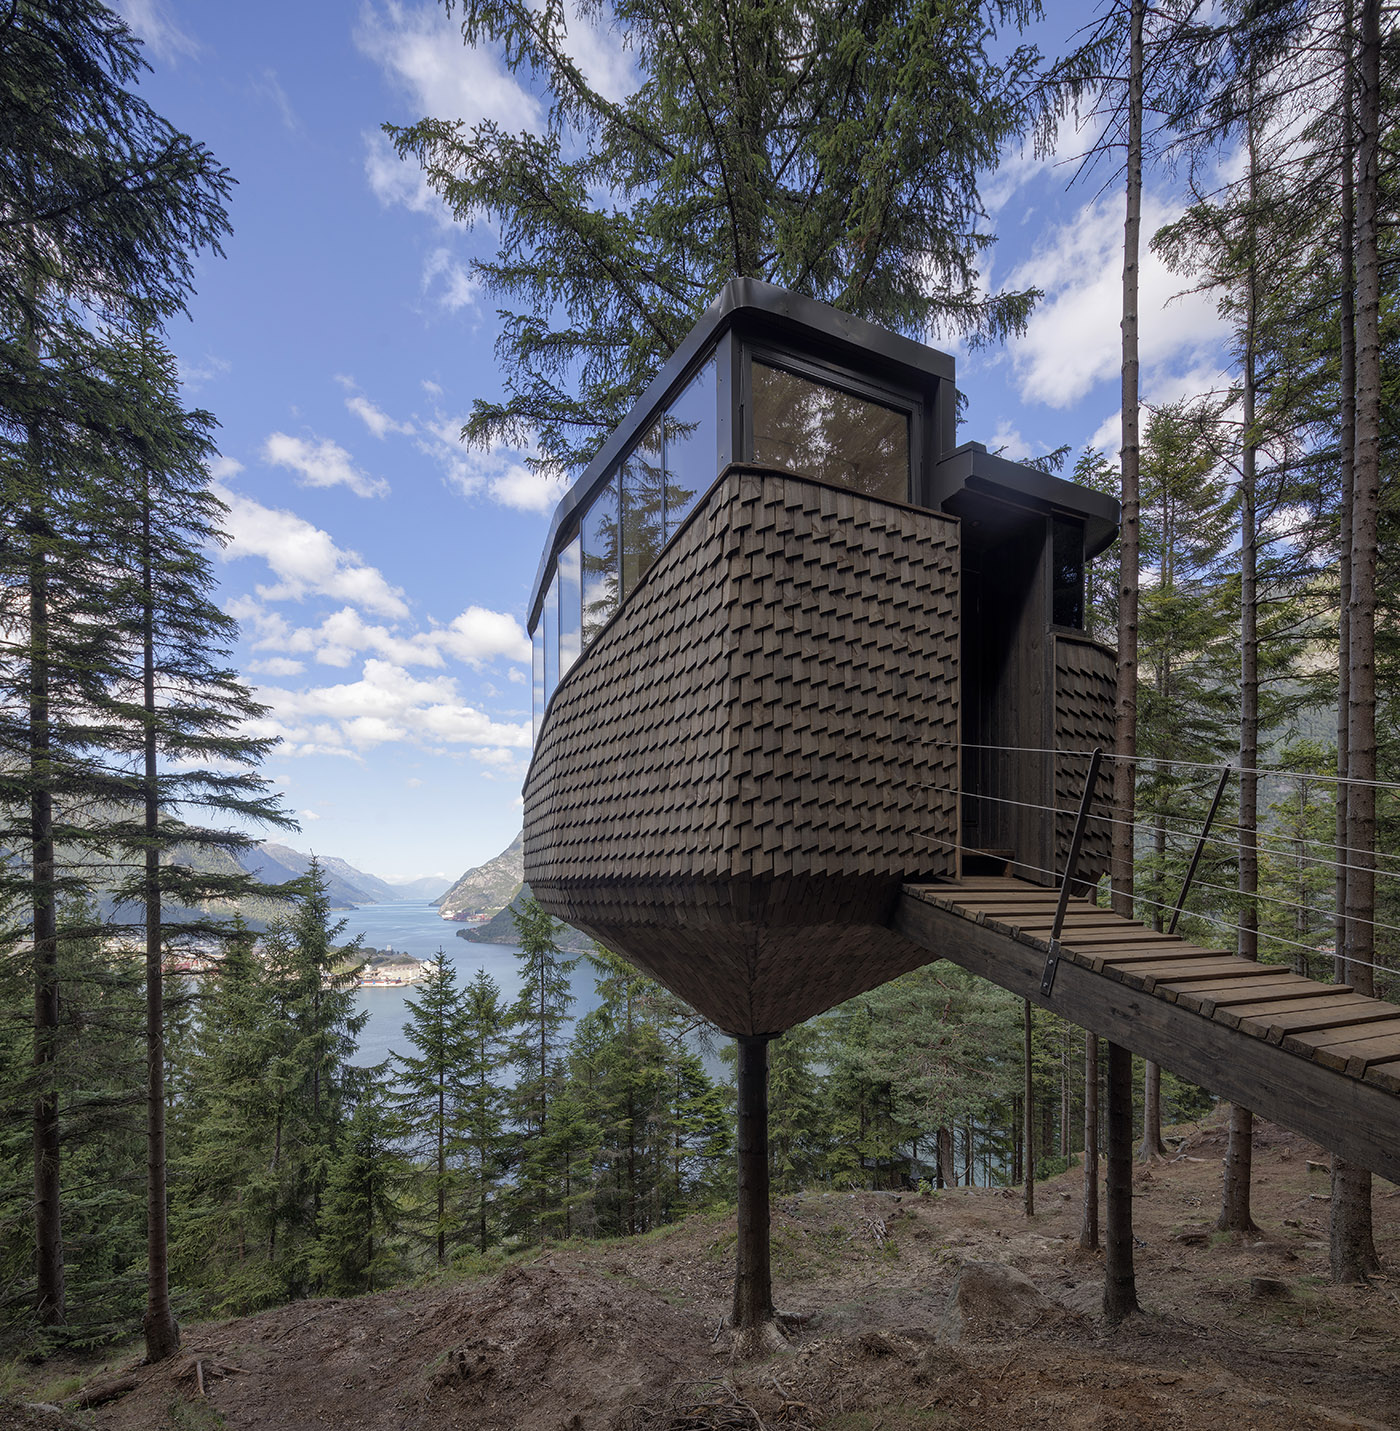 Two tree houses in Woodnest, on the steep woodland hills around Hardangerfjord